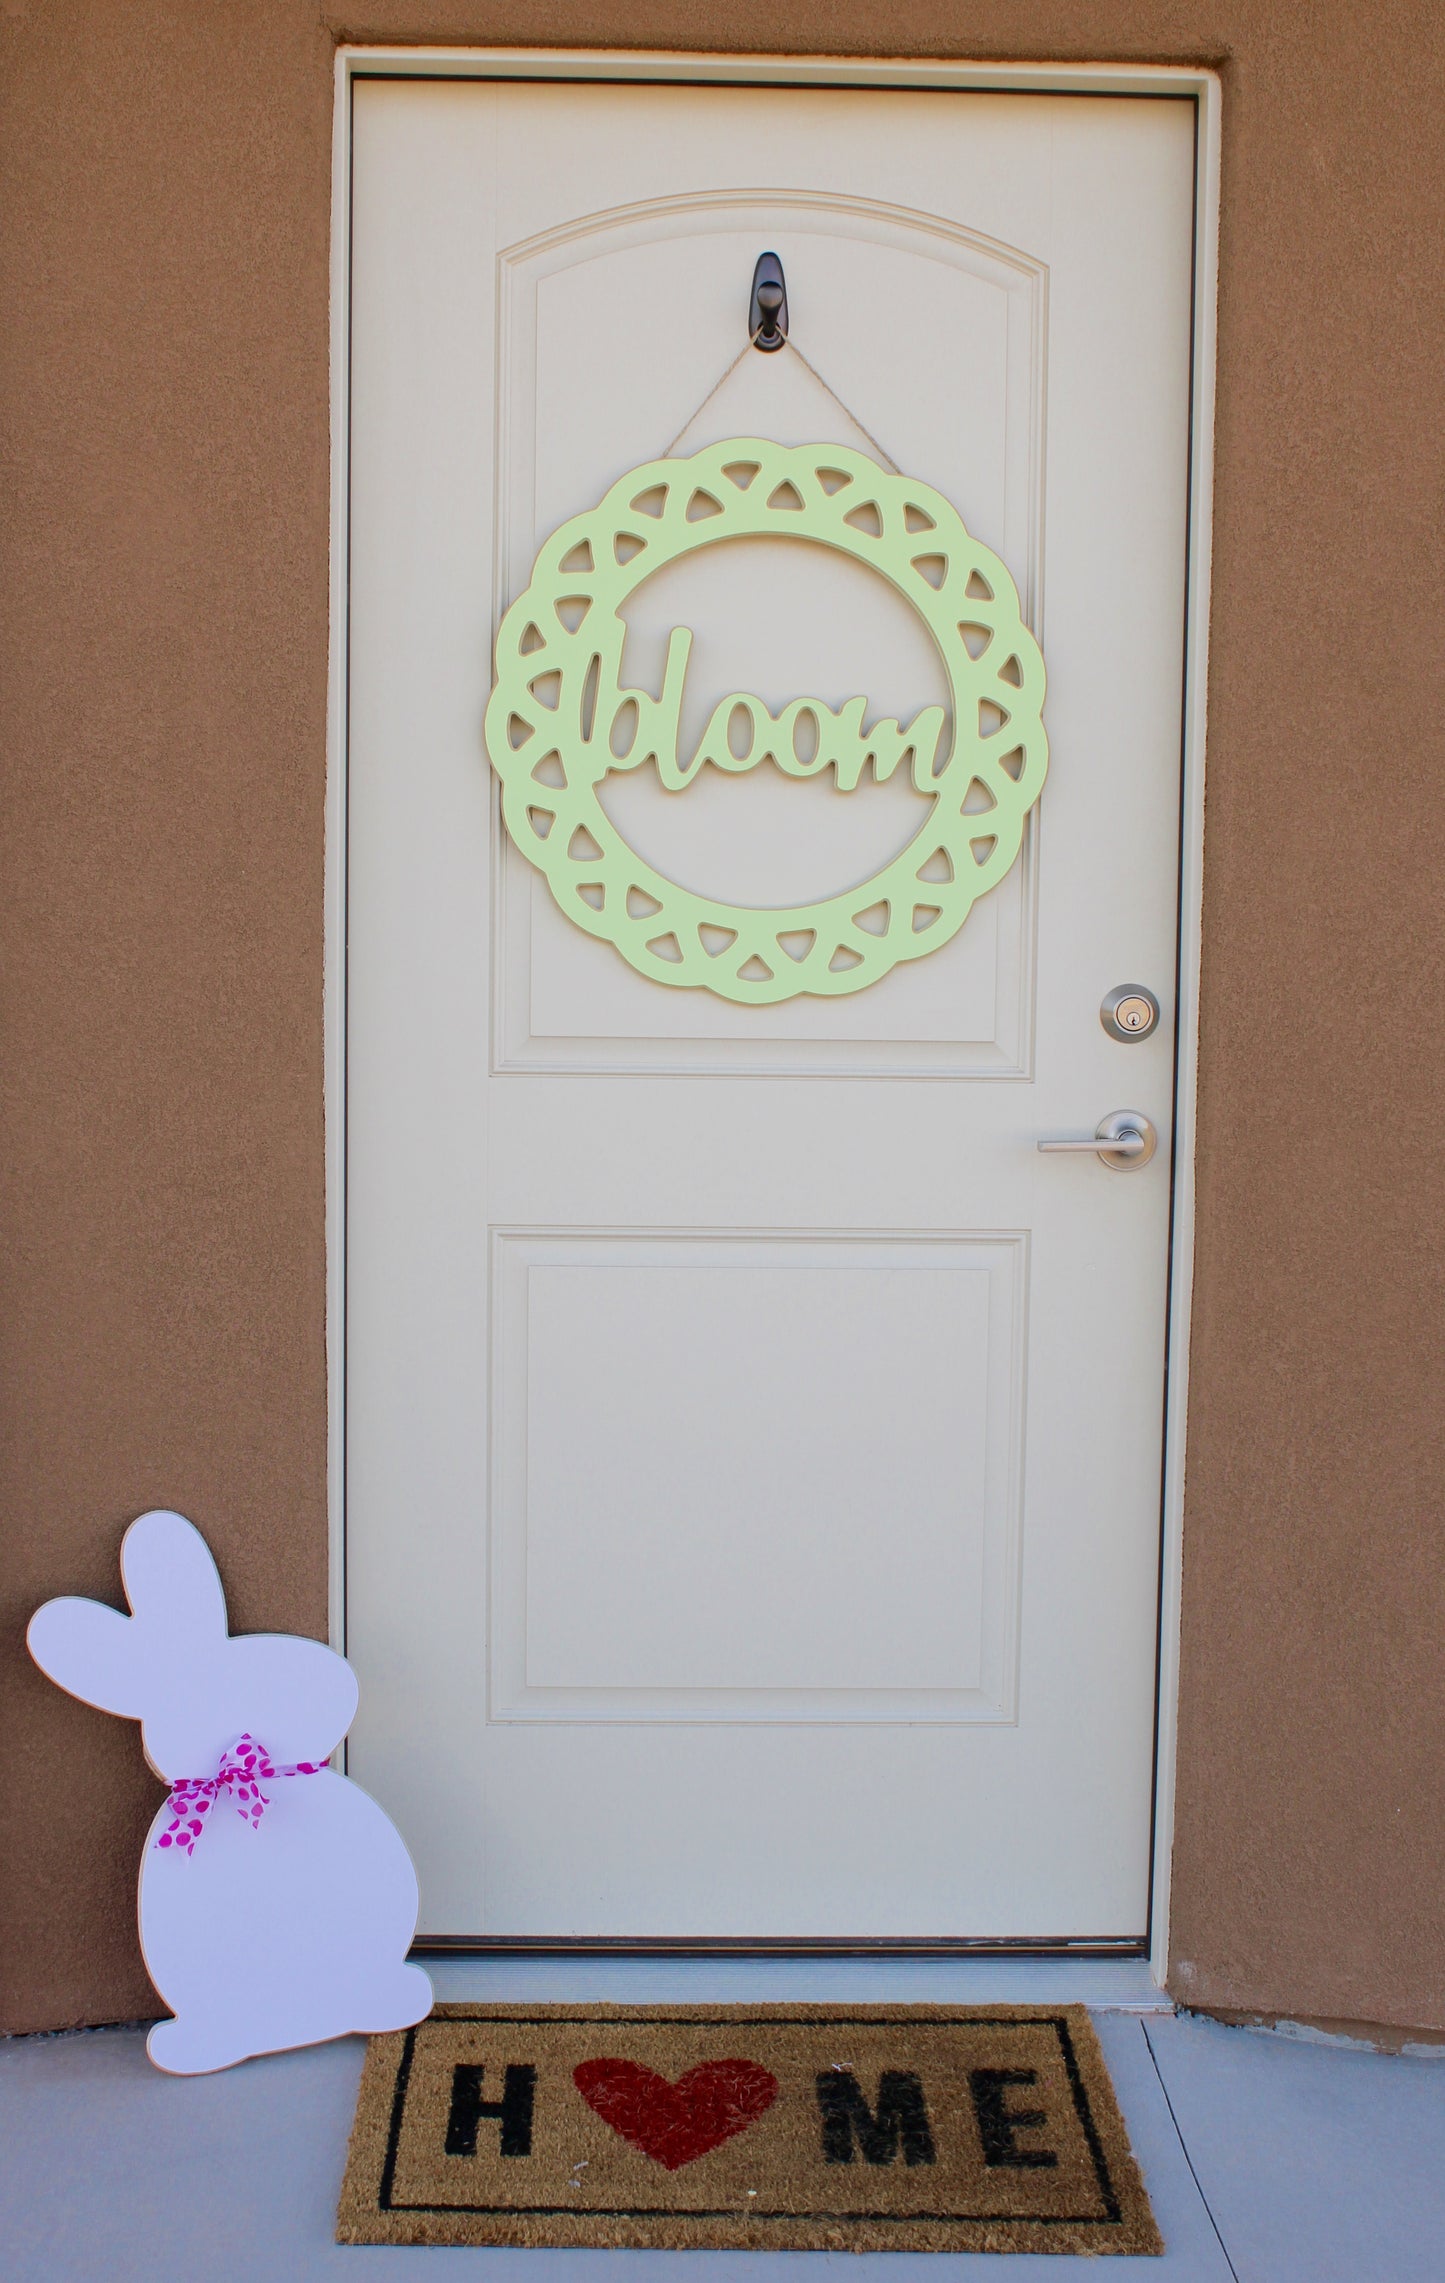 'Bloom' Circle Sign – 23.5" Floral-Inspired Welcome Door Decor for Spring and Summer